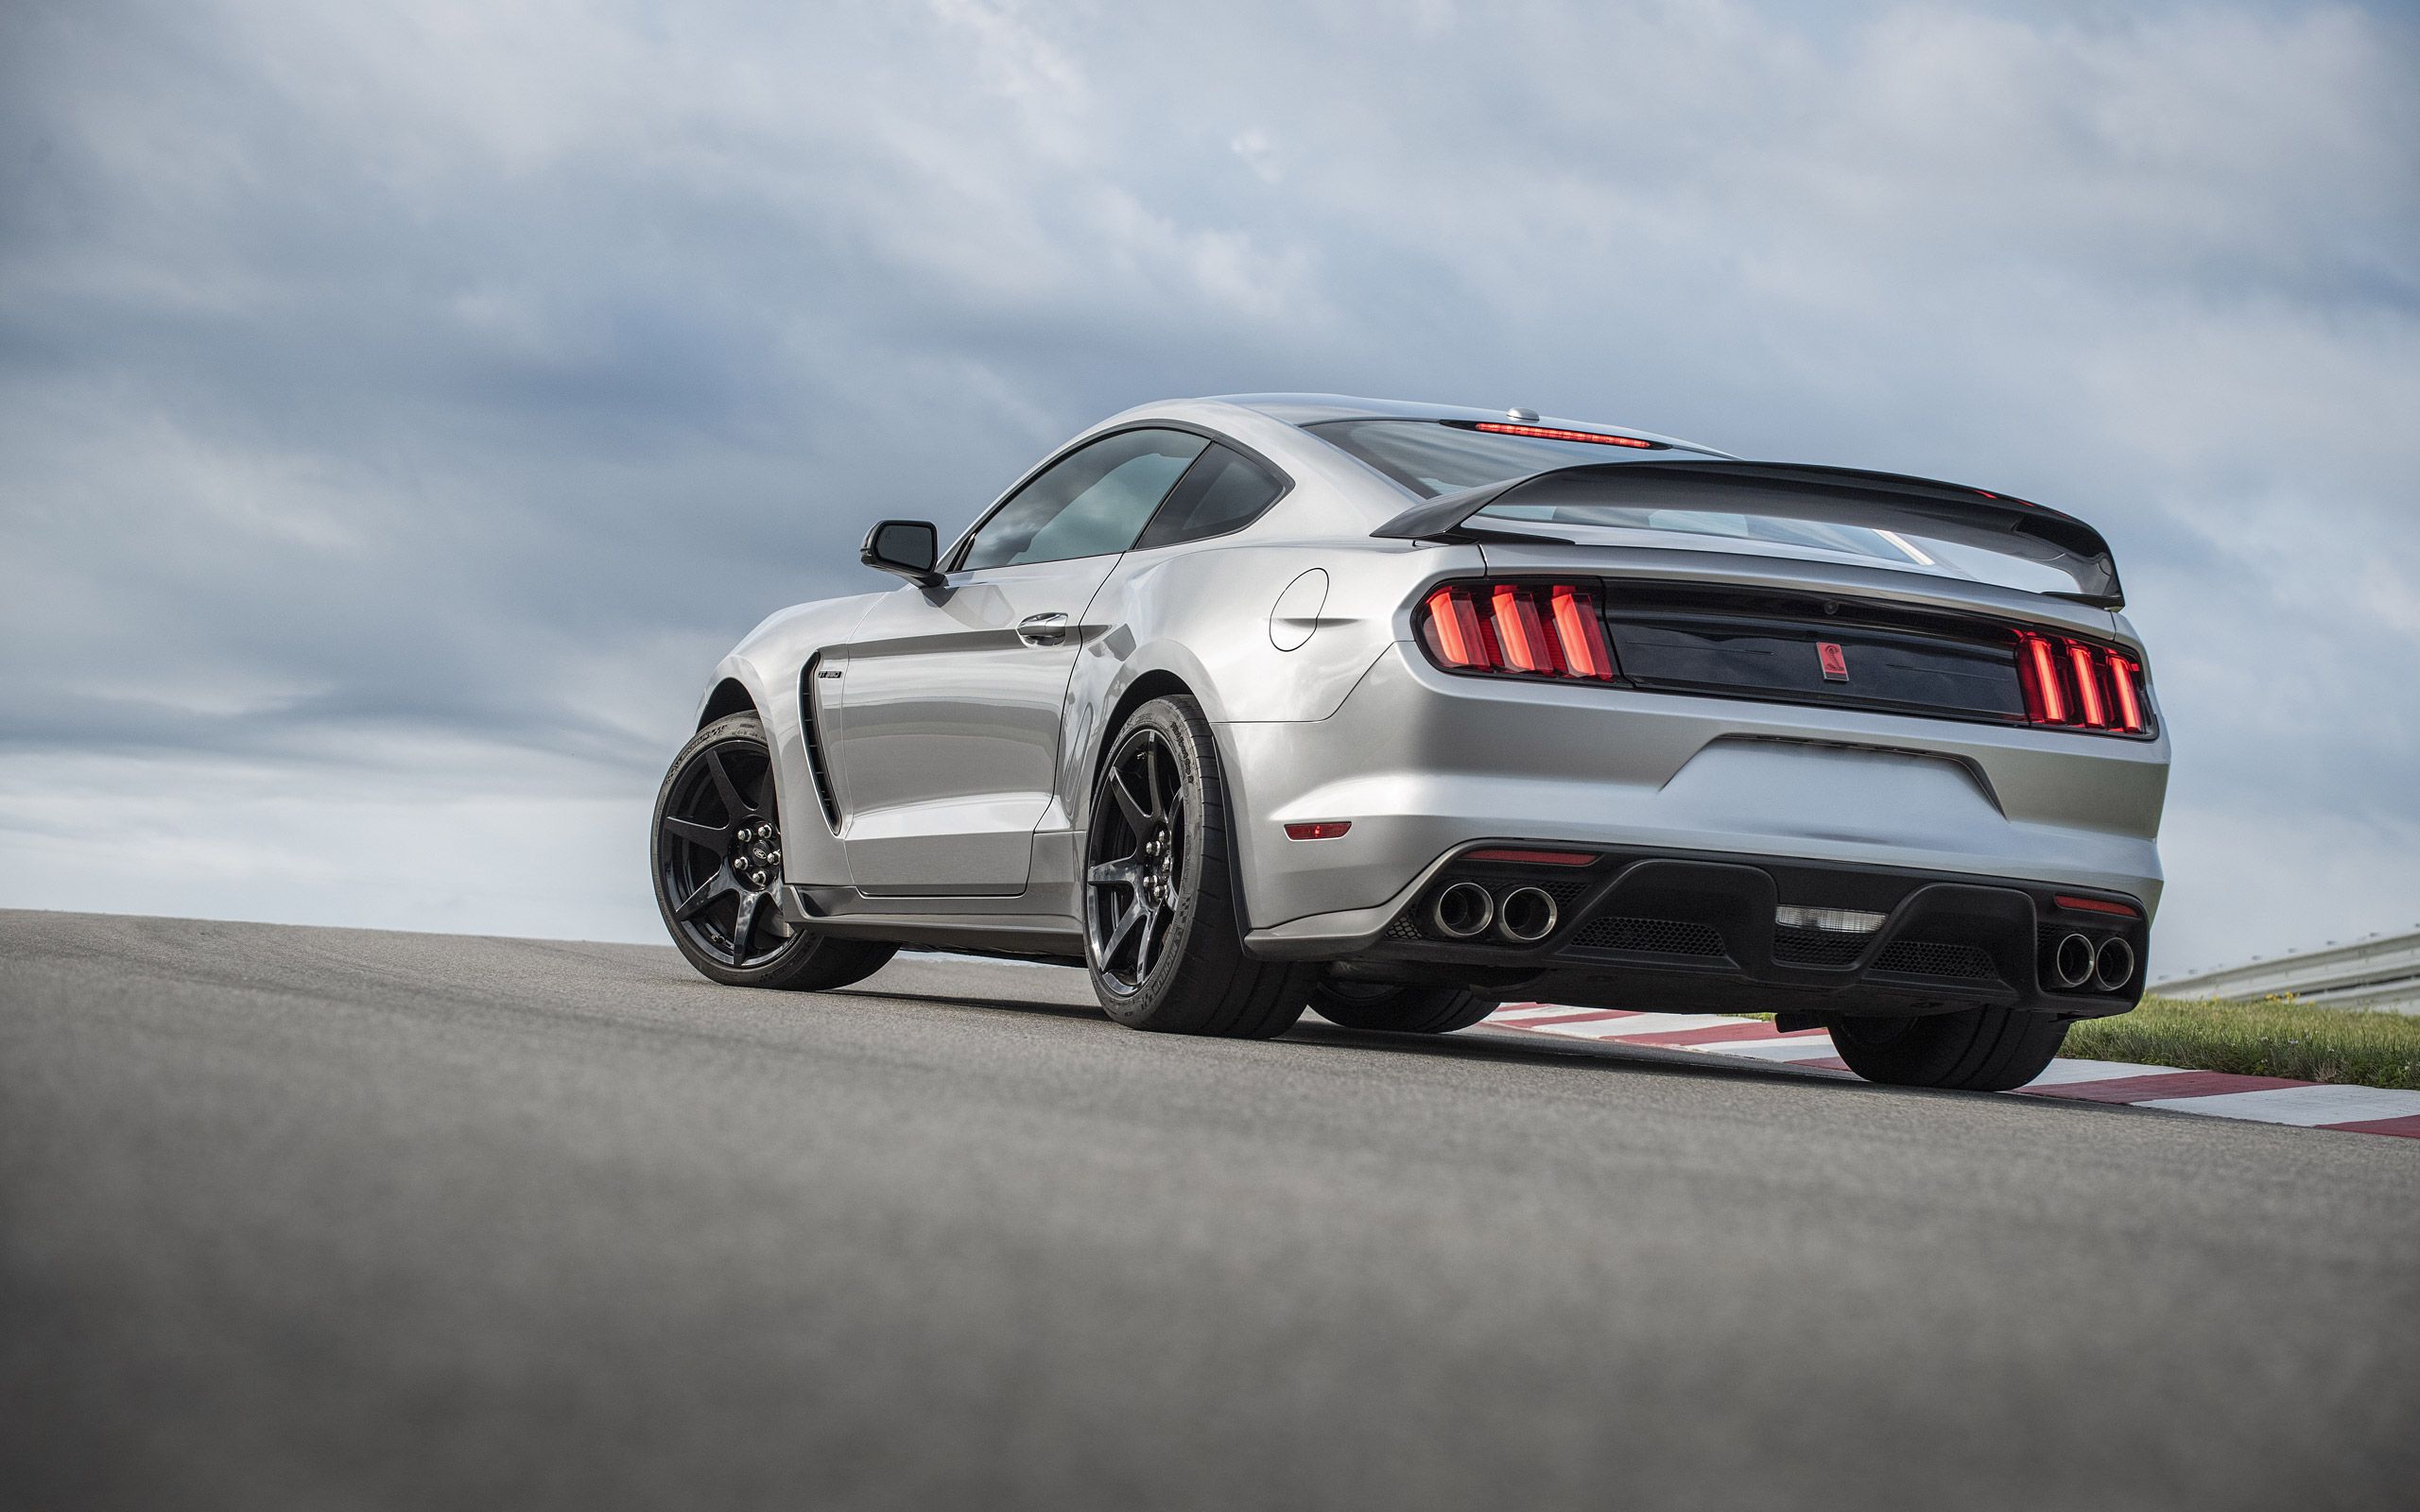 10 Things Ford Mustang Owners Will Never Tell You